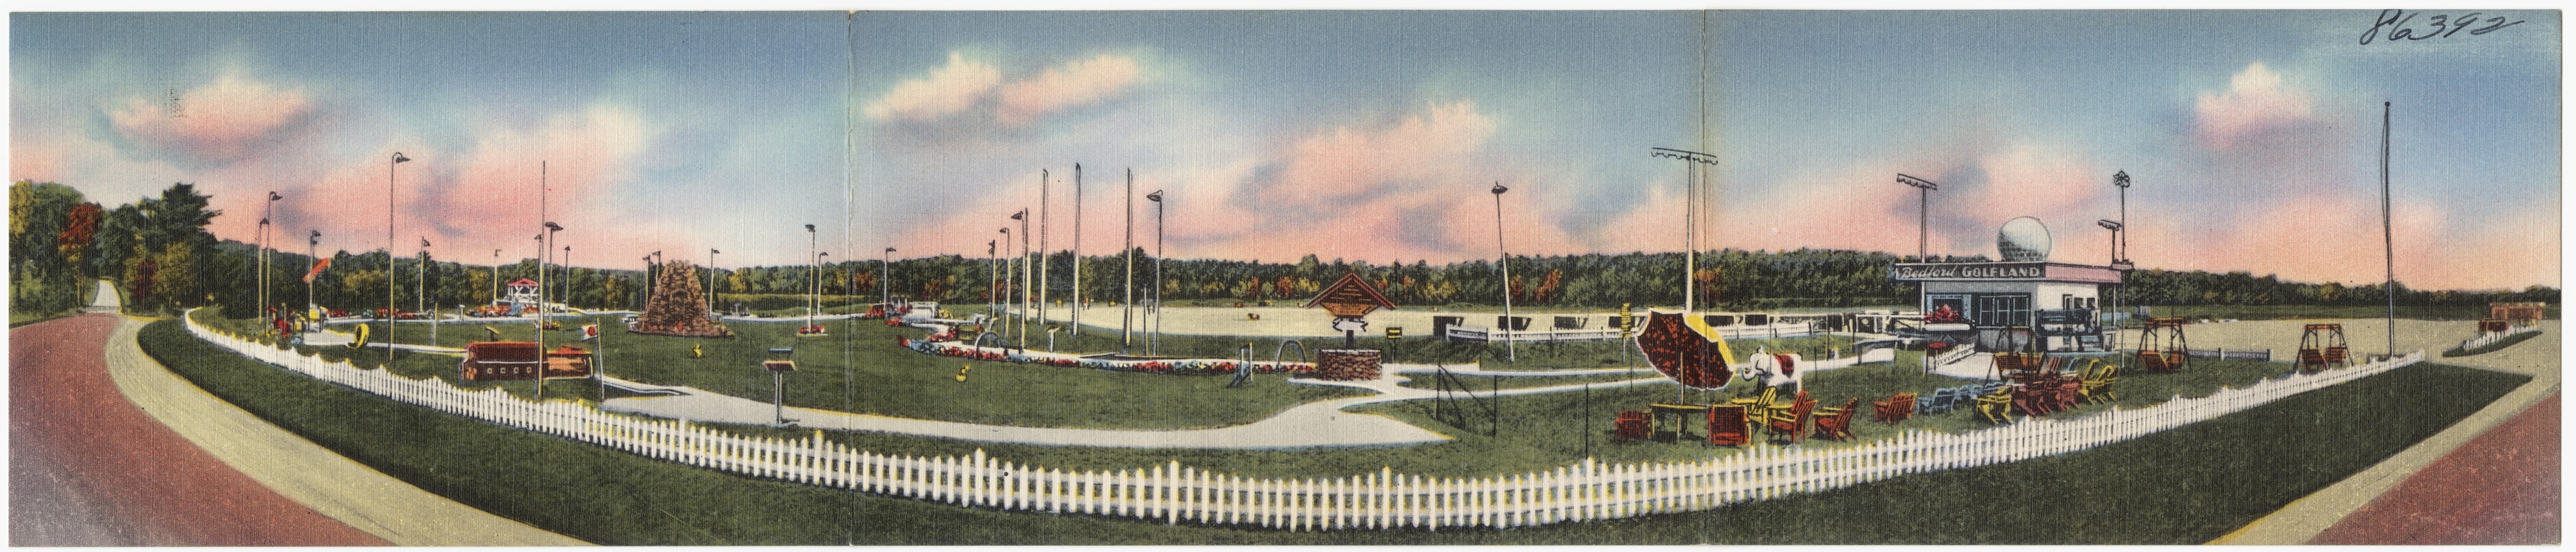 Bedford Golfland, Bedford-Manchester, New Hampshire